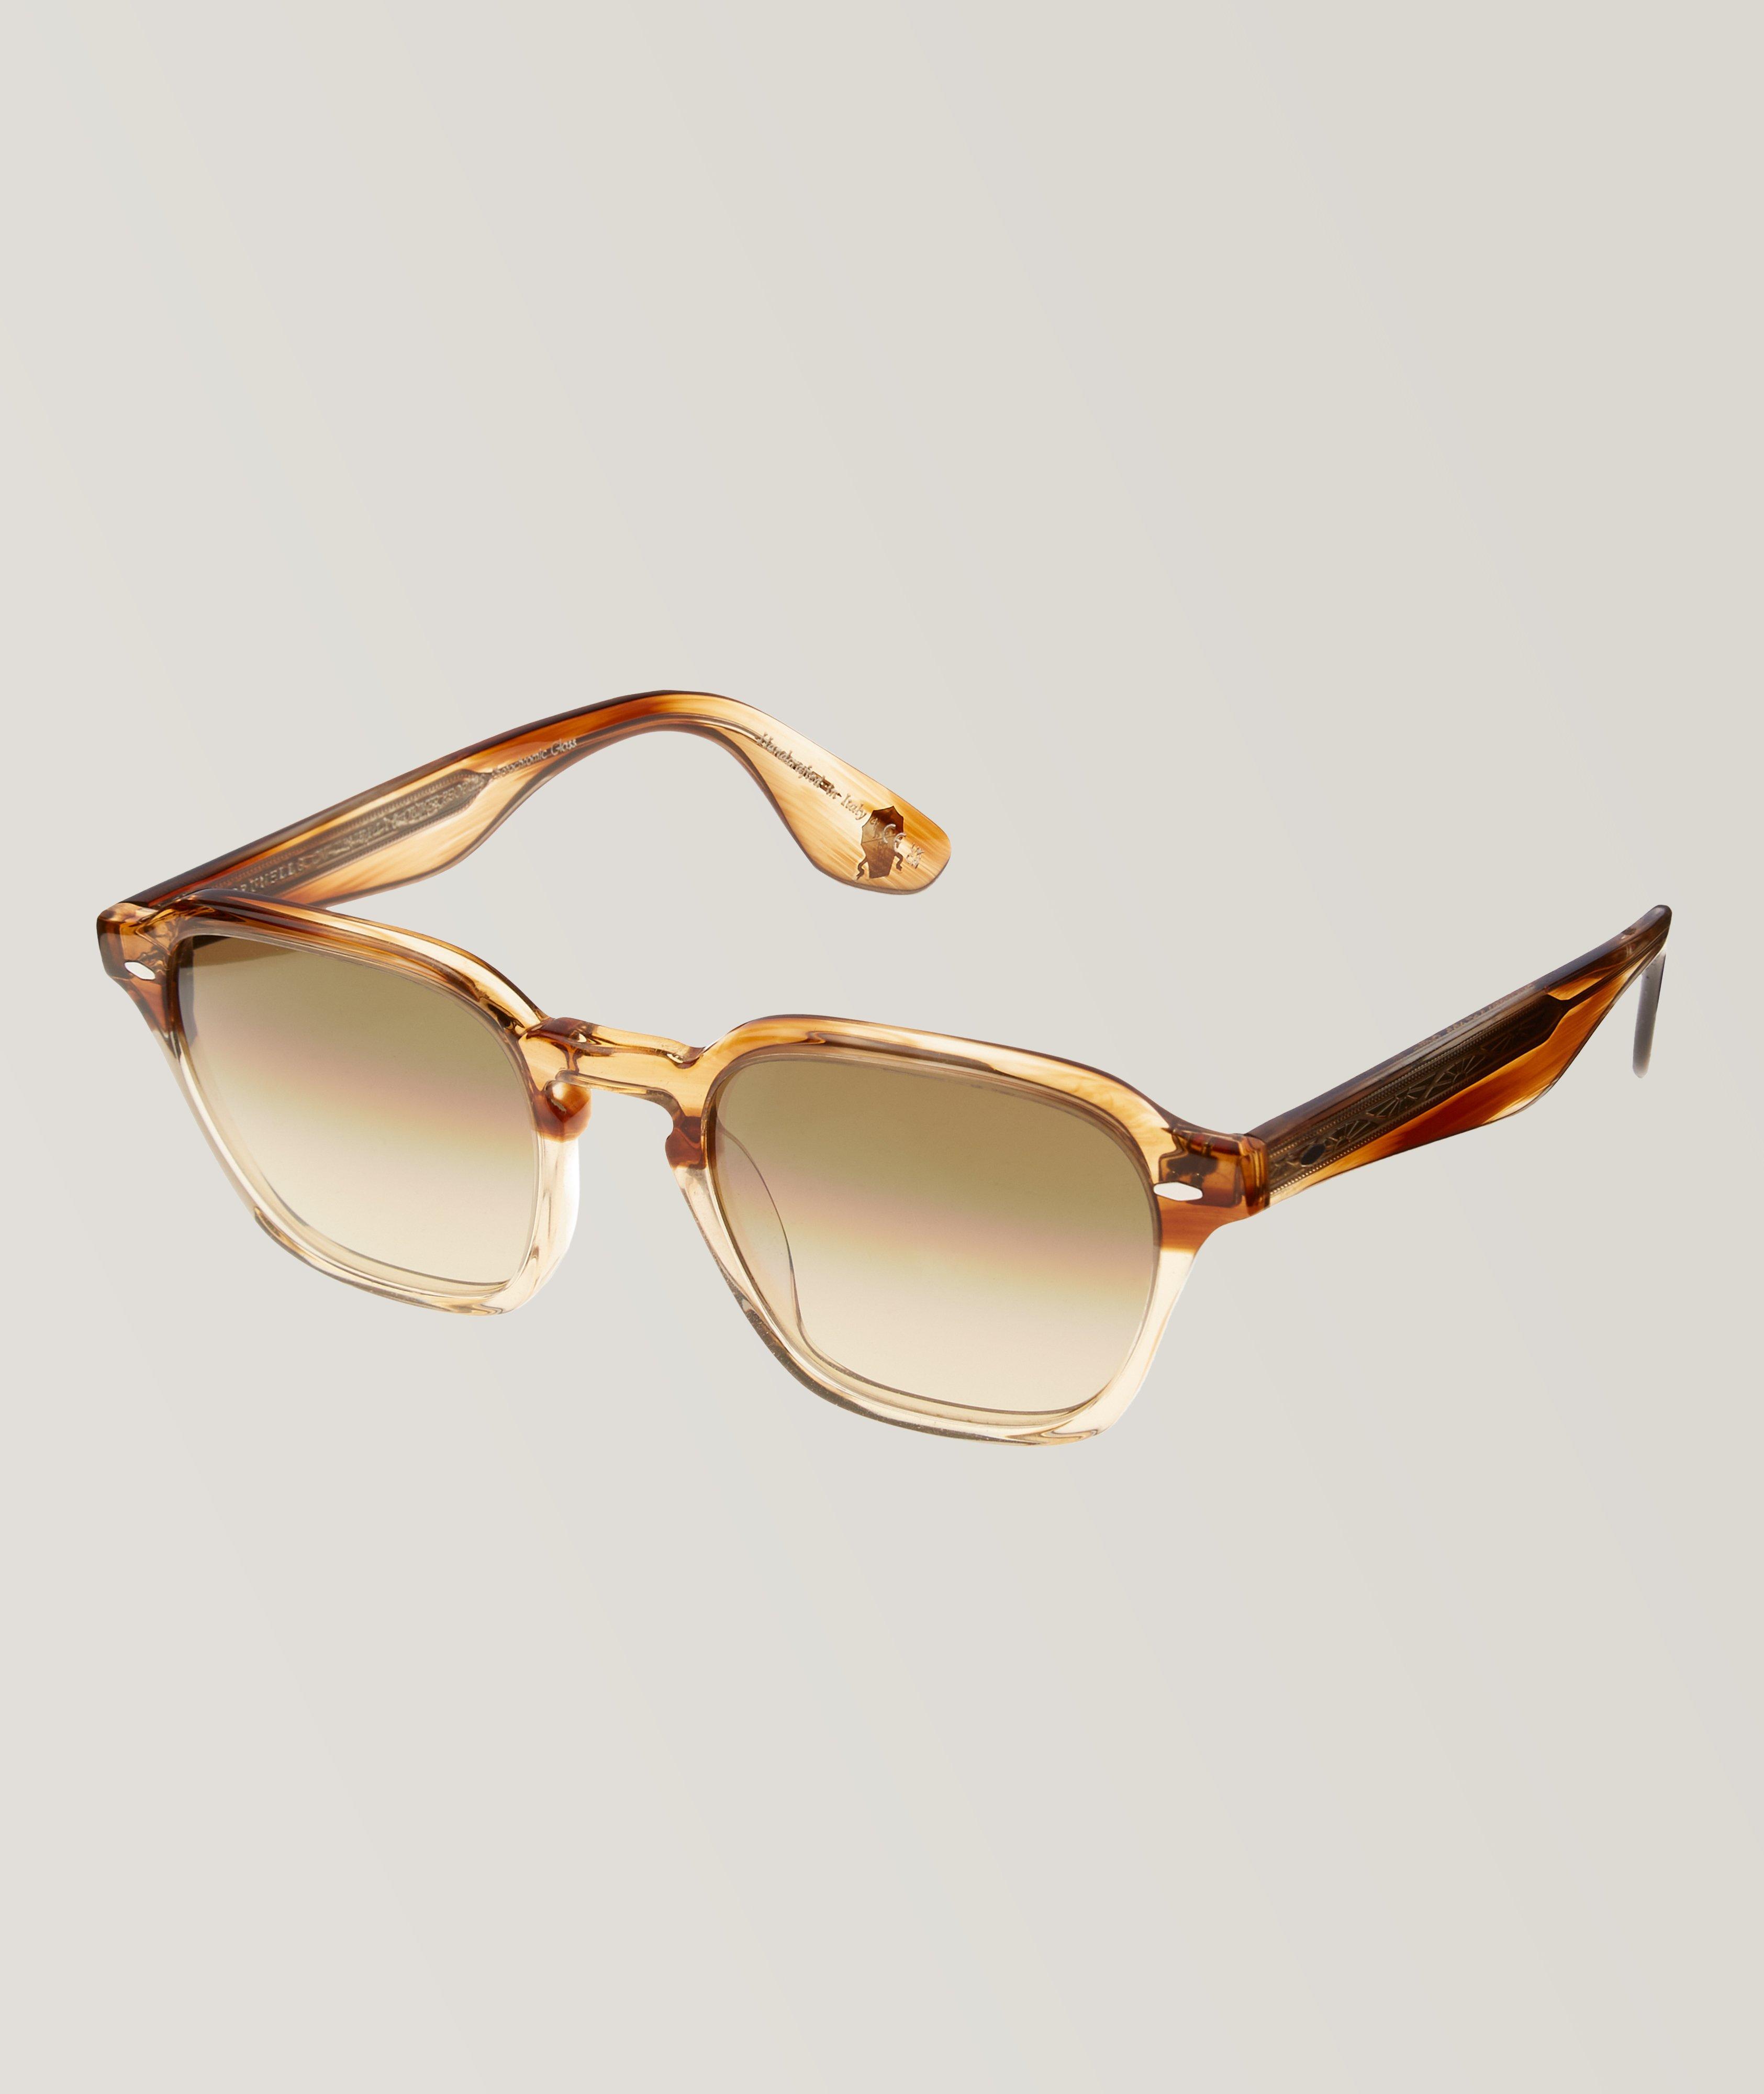 Oliver Peoples X Griffo Square Frame Sunglasses image 0